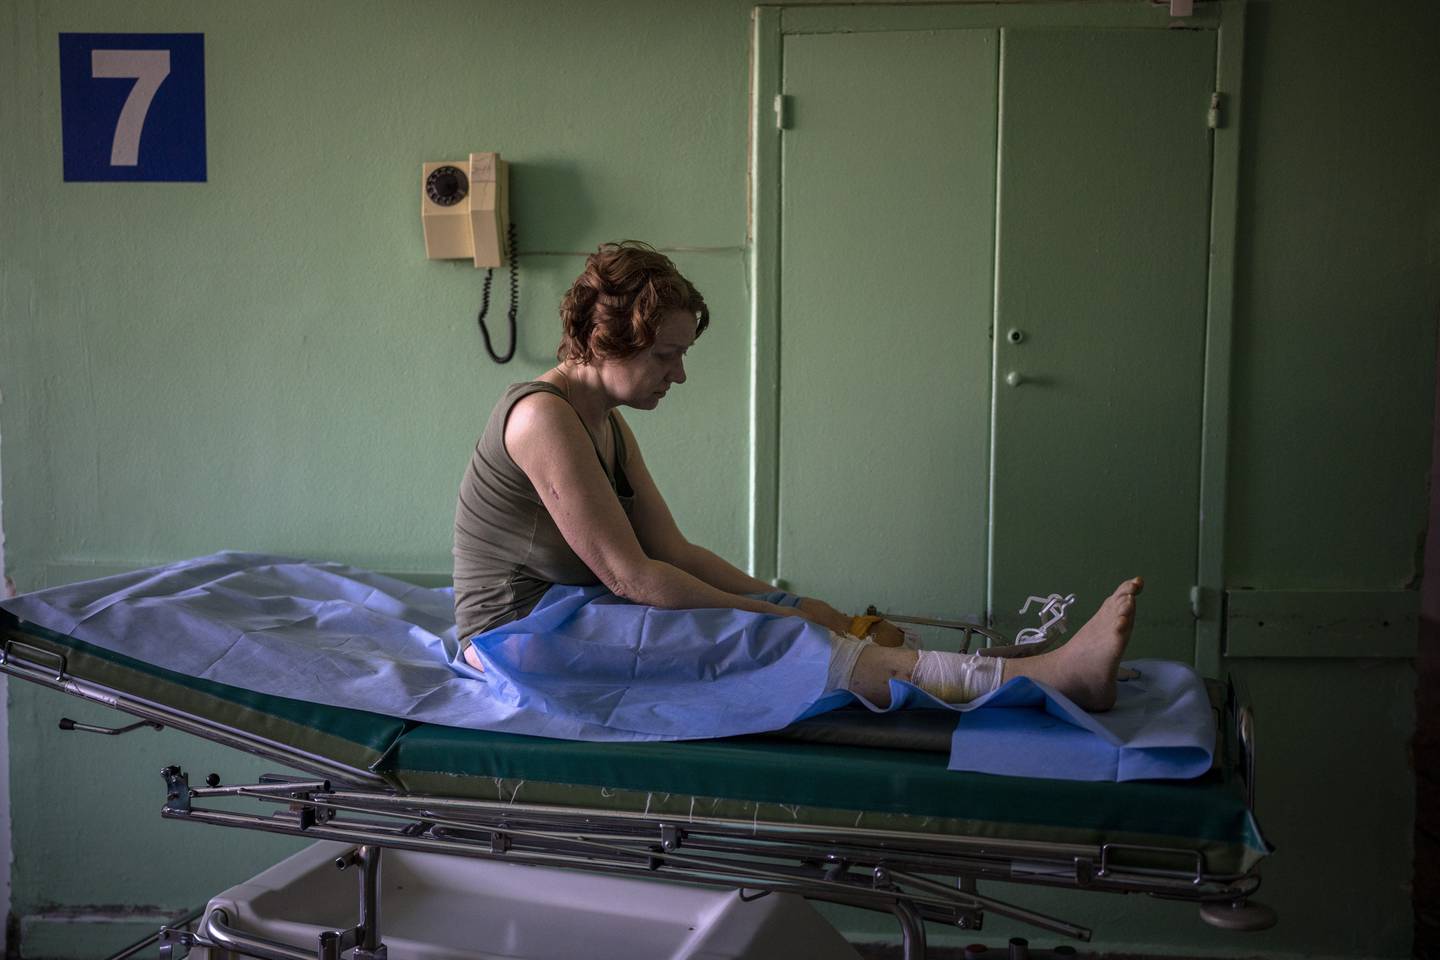 Olena Viter, 45, waits outside the operating theatre before a surgery, at a public hospital in Kyiv, Ukraine, Tuesday, May 10, 2022. Olena lost her leg and her 14-year-old son Ivan when bombs rained down on their village Rozvazhiv, in the Kyiv region, on March 14. Four people died, including Ivan, and about 20 were wounded. (AP Photo/Emilio Morenatti)